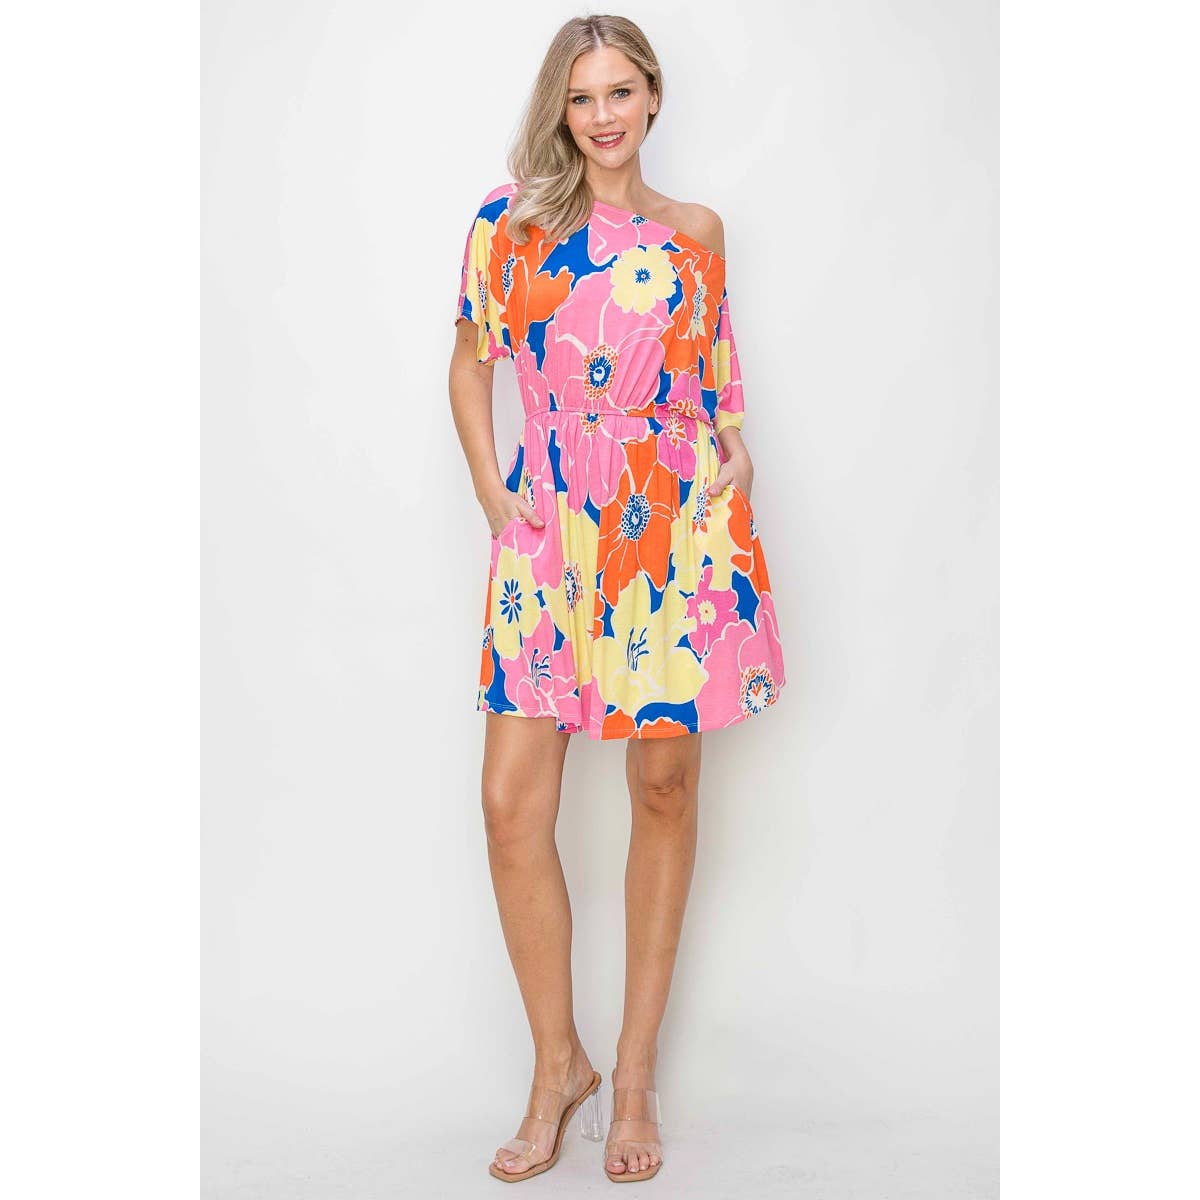 OL24A267-9-WIDE BOAT NECK FLORALL PRINT DRESS: S / PINK MULTI